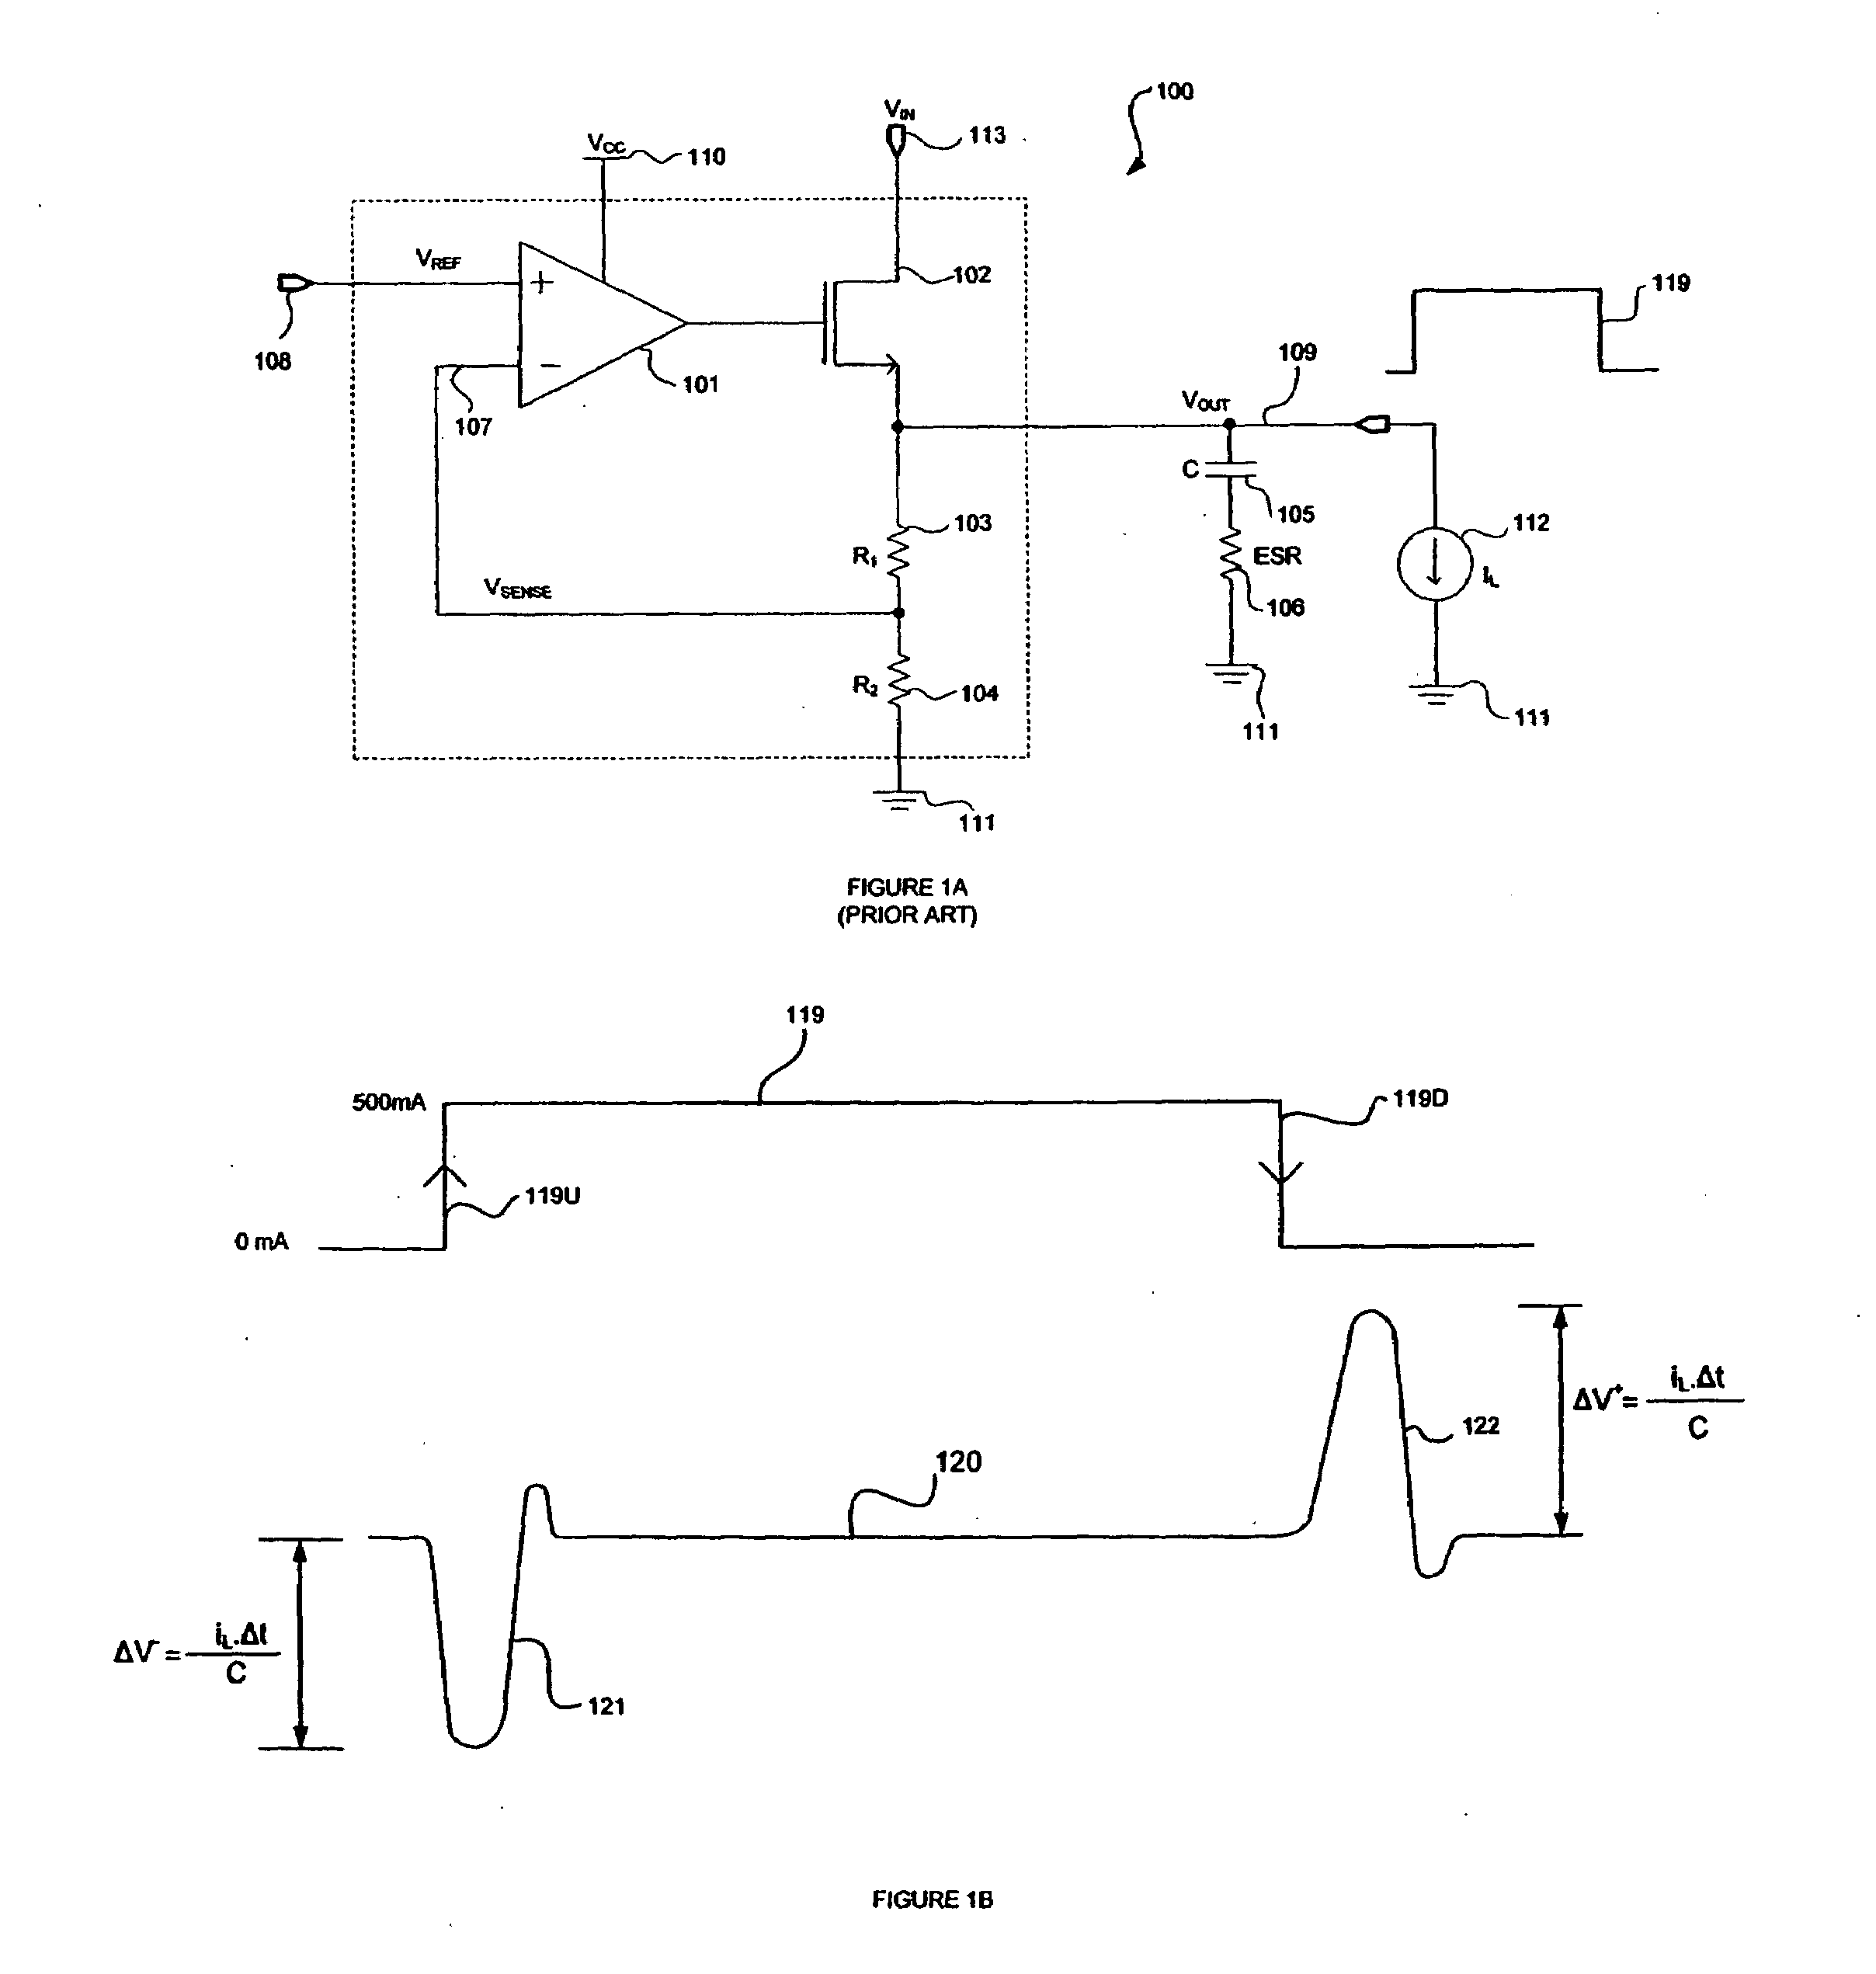 Method and apparatus for overshoot and undershoot errors correction in analog low dropout regulators